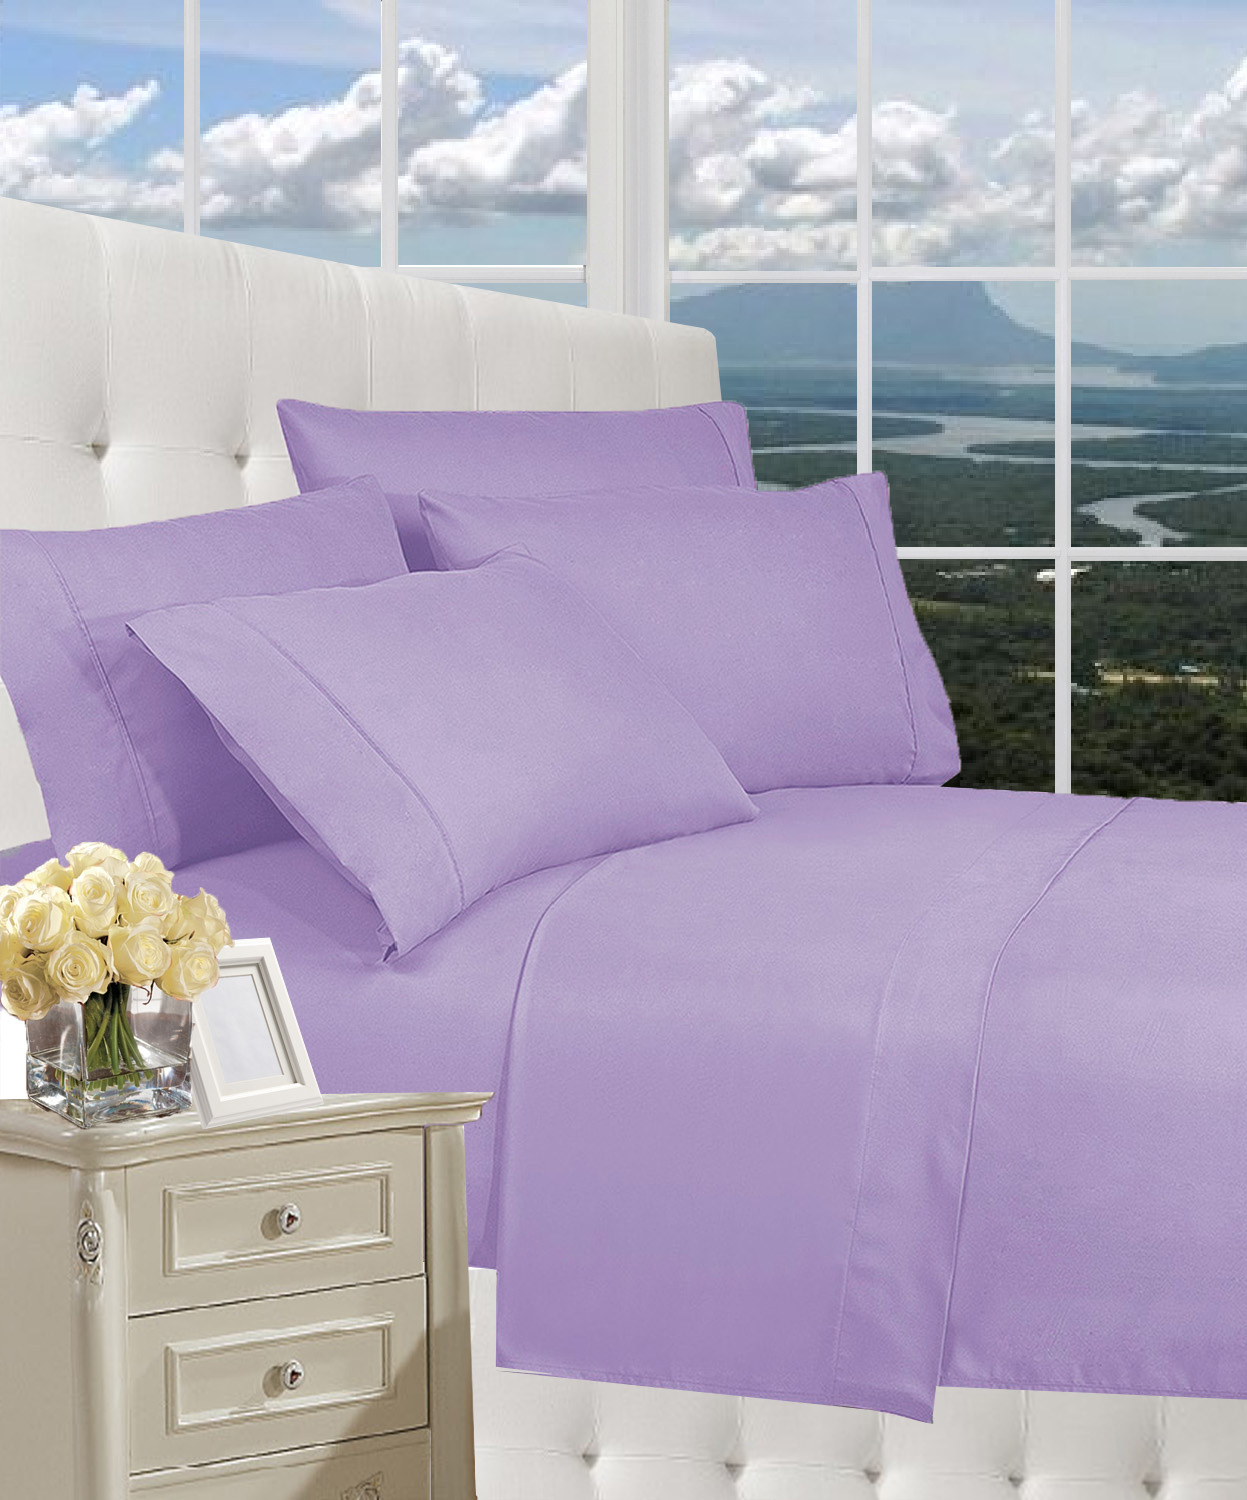 Elegant Comfort 1800 Series Wrinkle Resistant Egyptian Quality Hypoallergenic Ultra Soft Luxury 3-piece Bed Sheet Set, Twin, Lilac